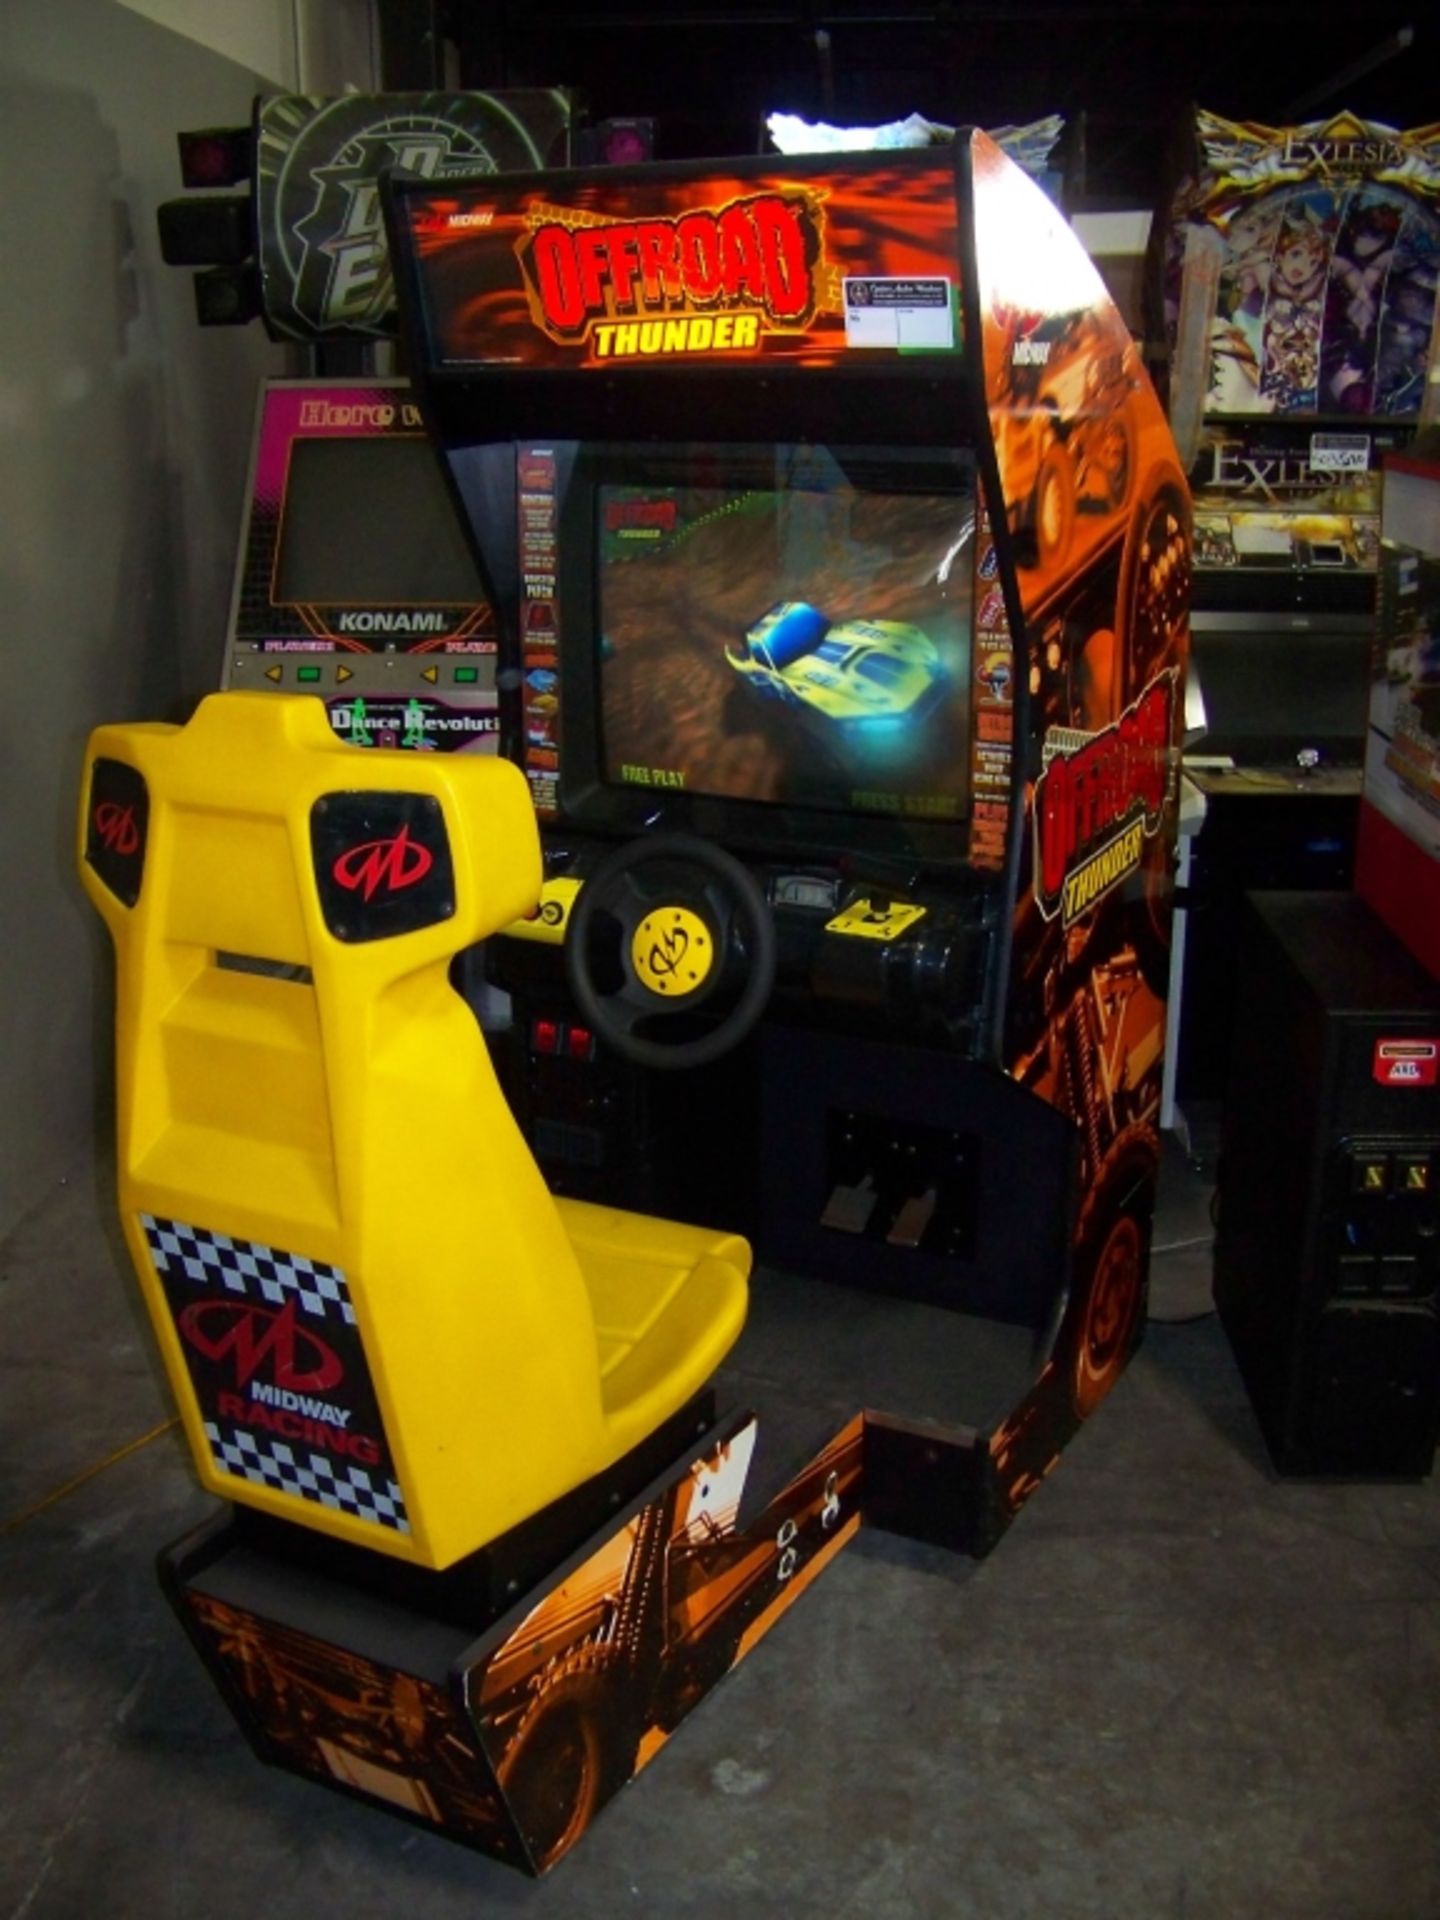 OFFROAD THUNDER MIDWAY RACING ARCADE GAME - Image 5 of 7